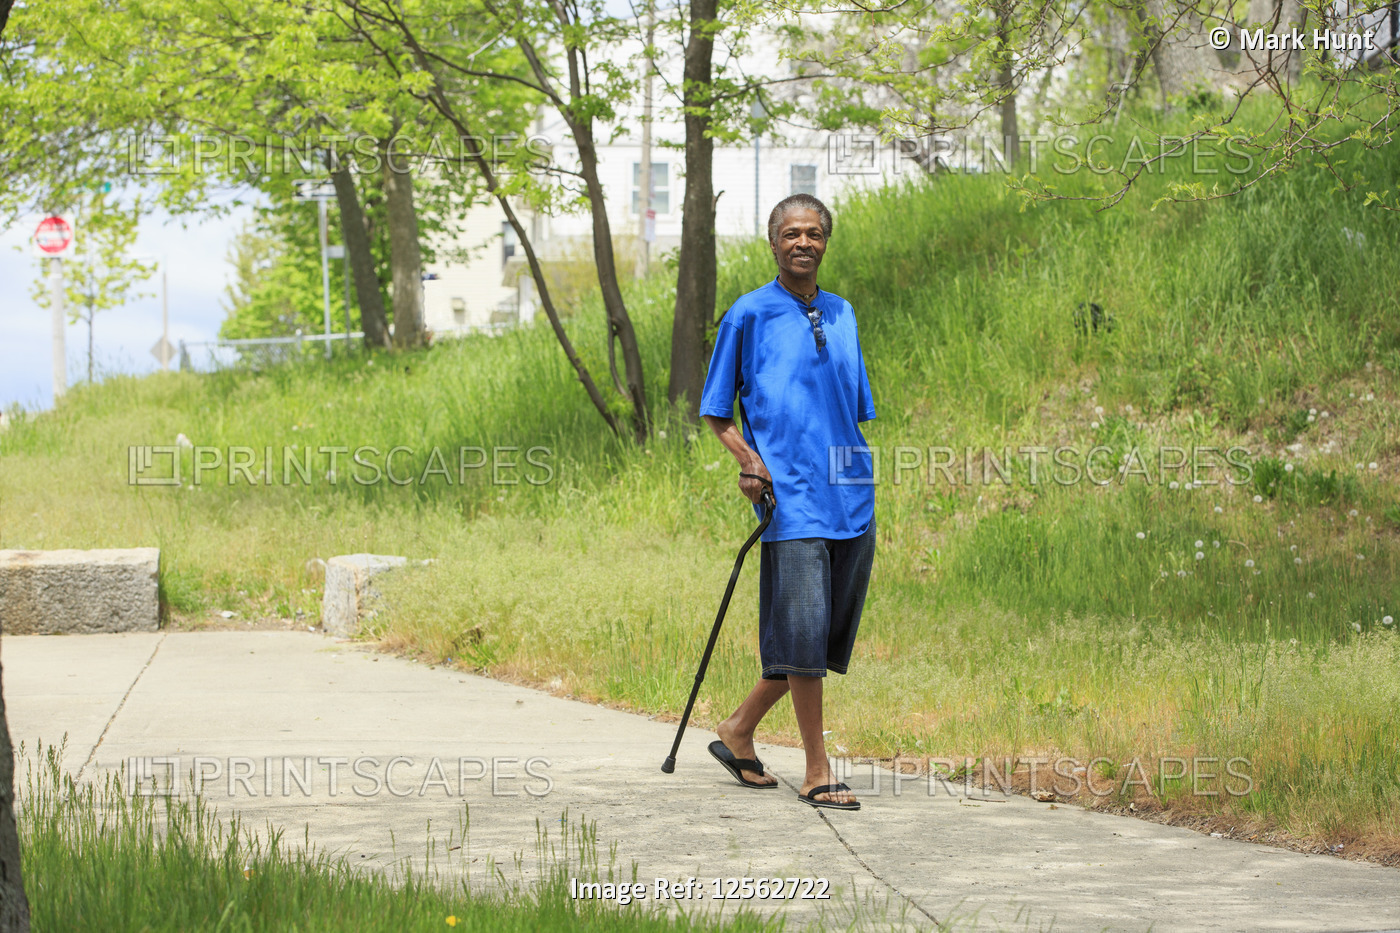 Man with Traumatic Brain Injury taking a walk with his cane